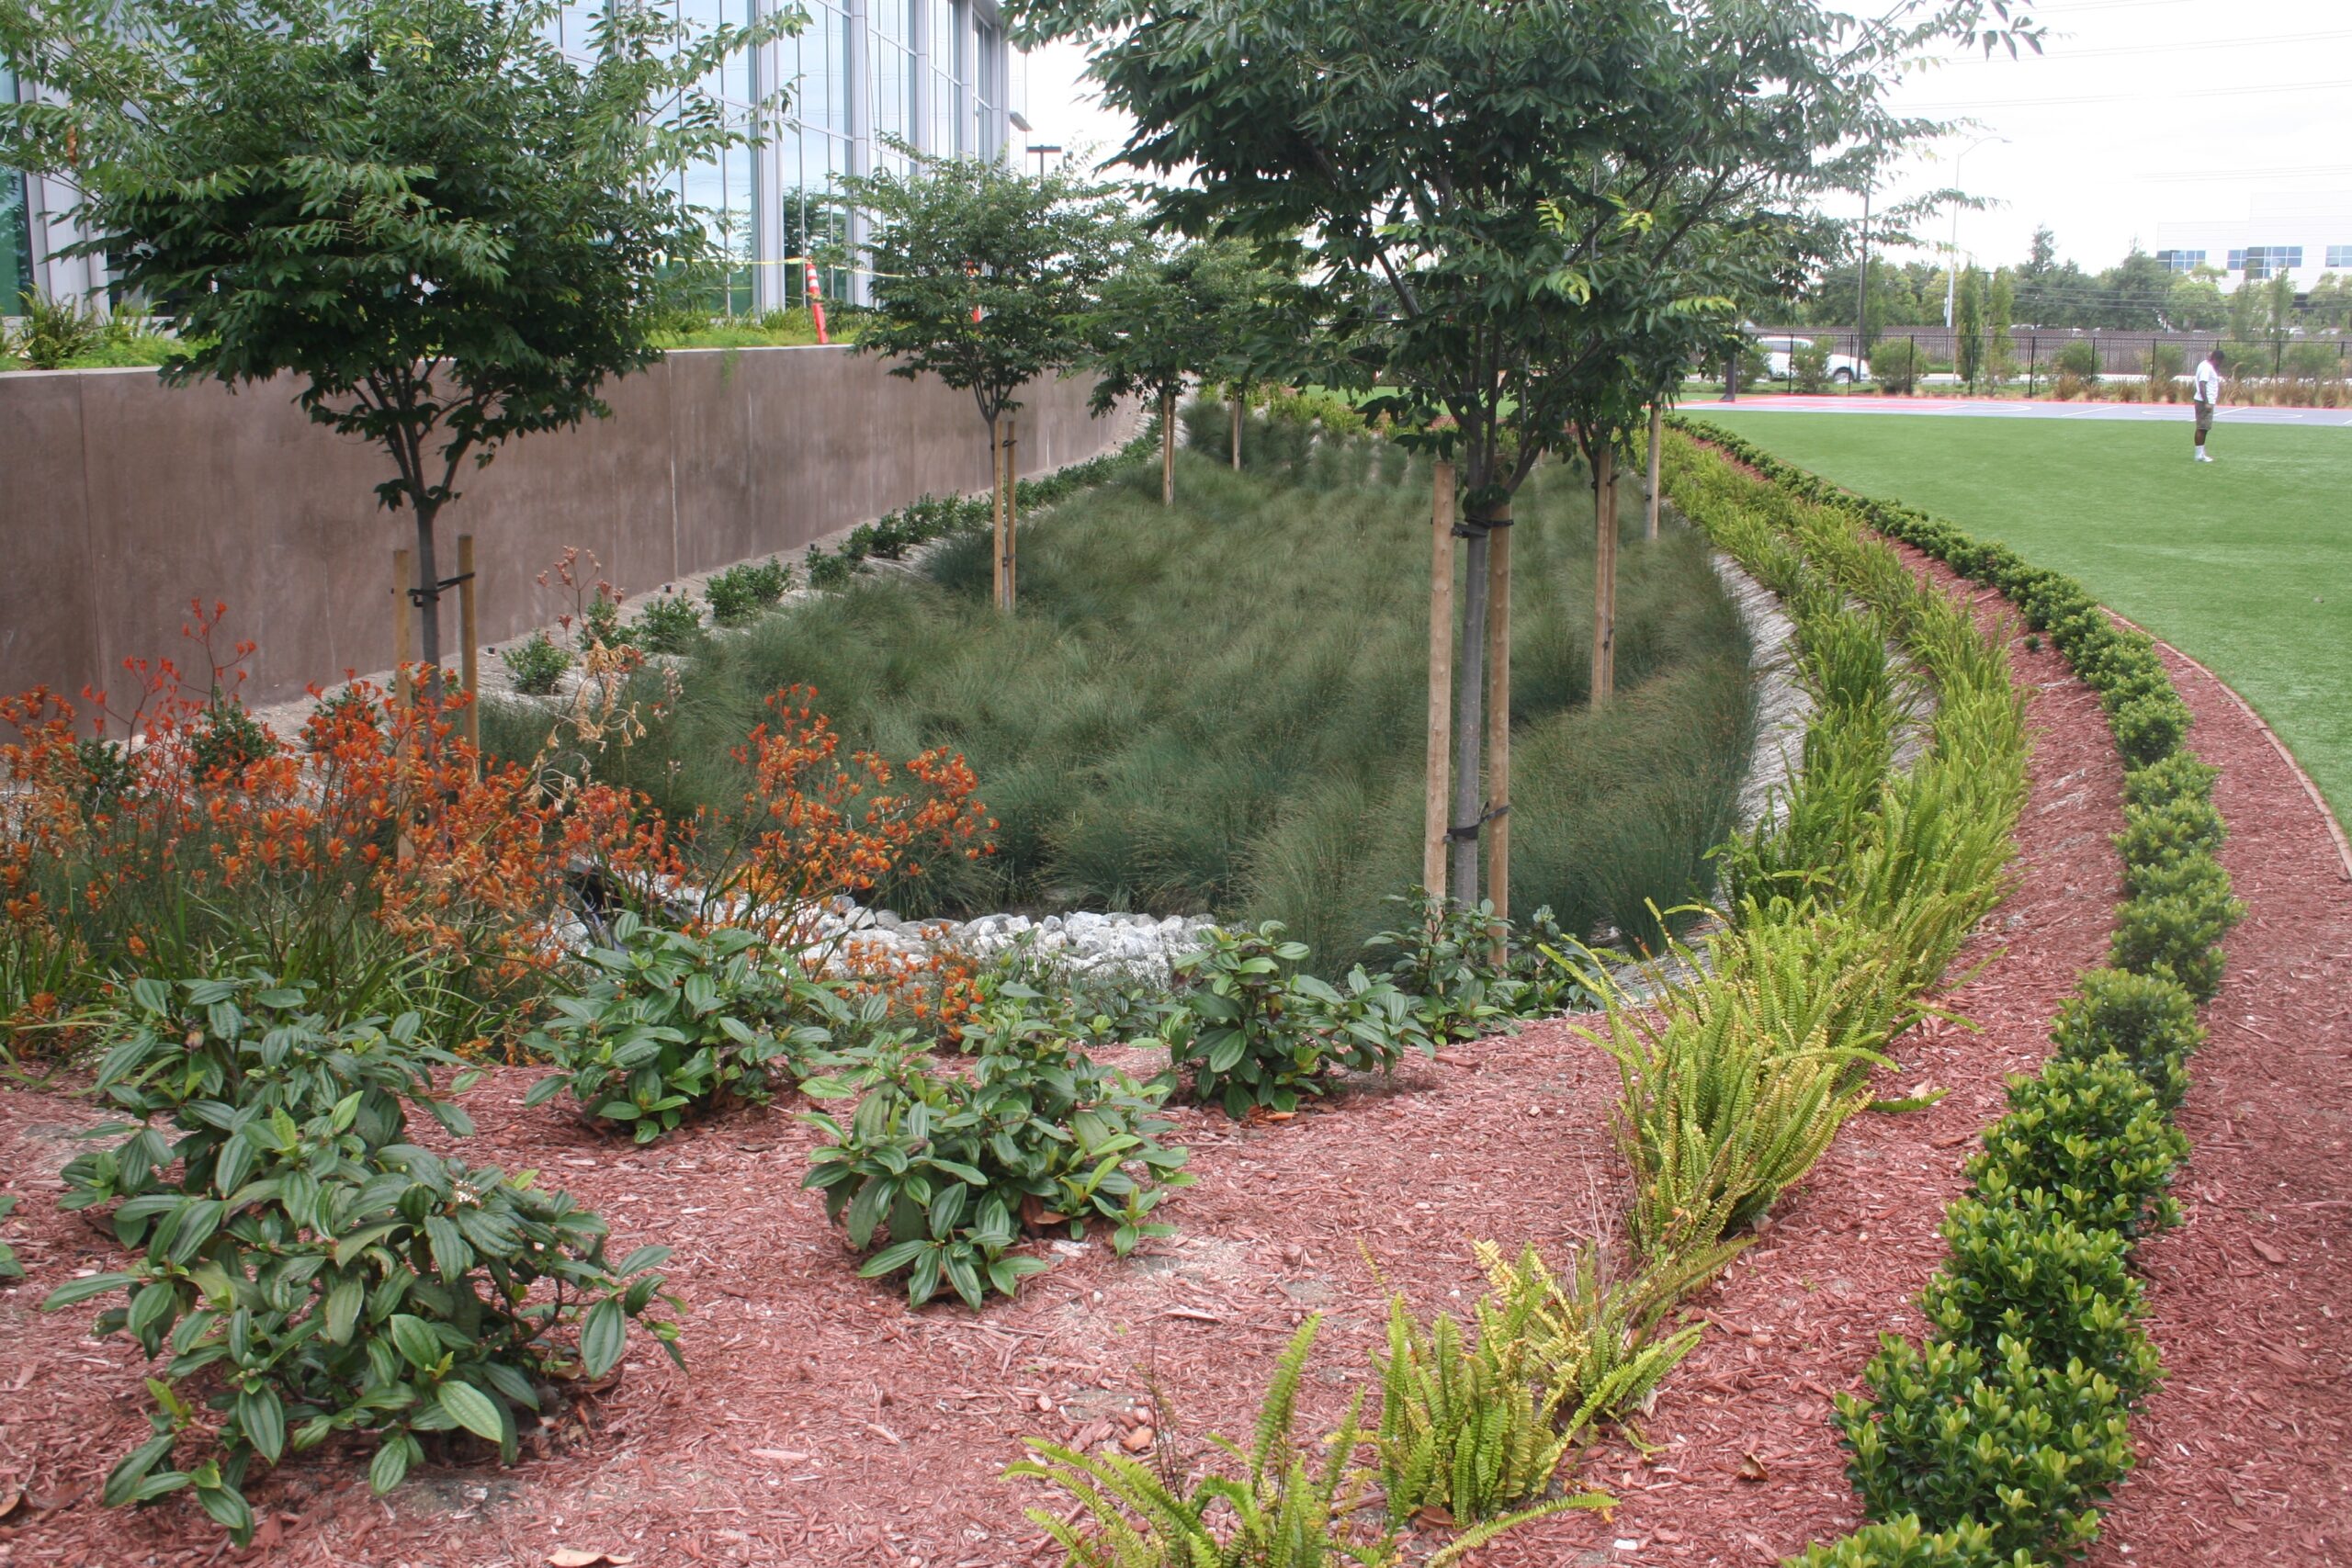 A bioswale is an aesthetically pleasing green infrastructure option that captures rainwater and runoff that can also be used to create habitats for native species, birds, or other plants; they can also filter out pollutants as they capture water. 